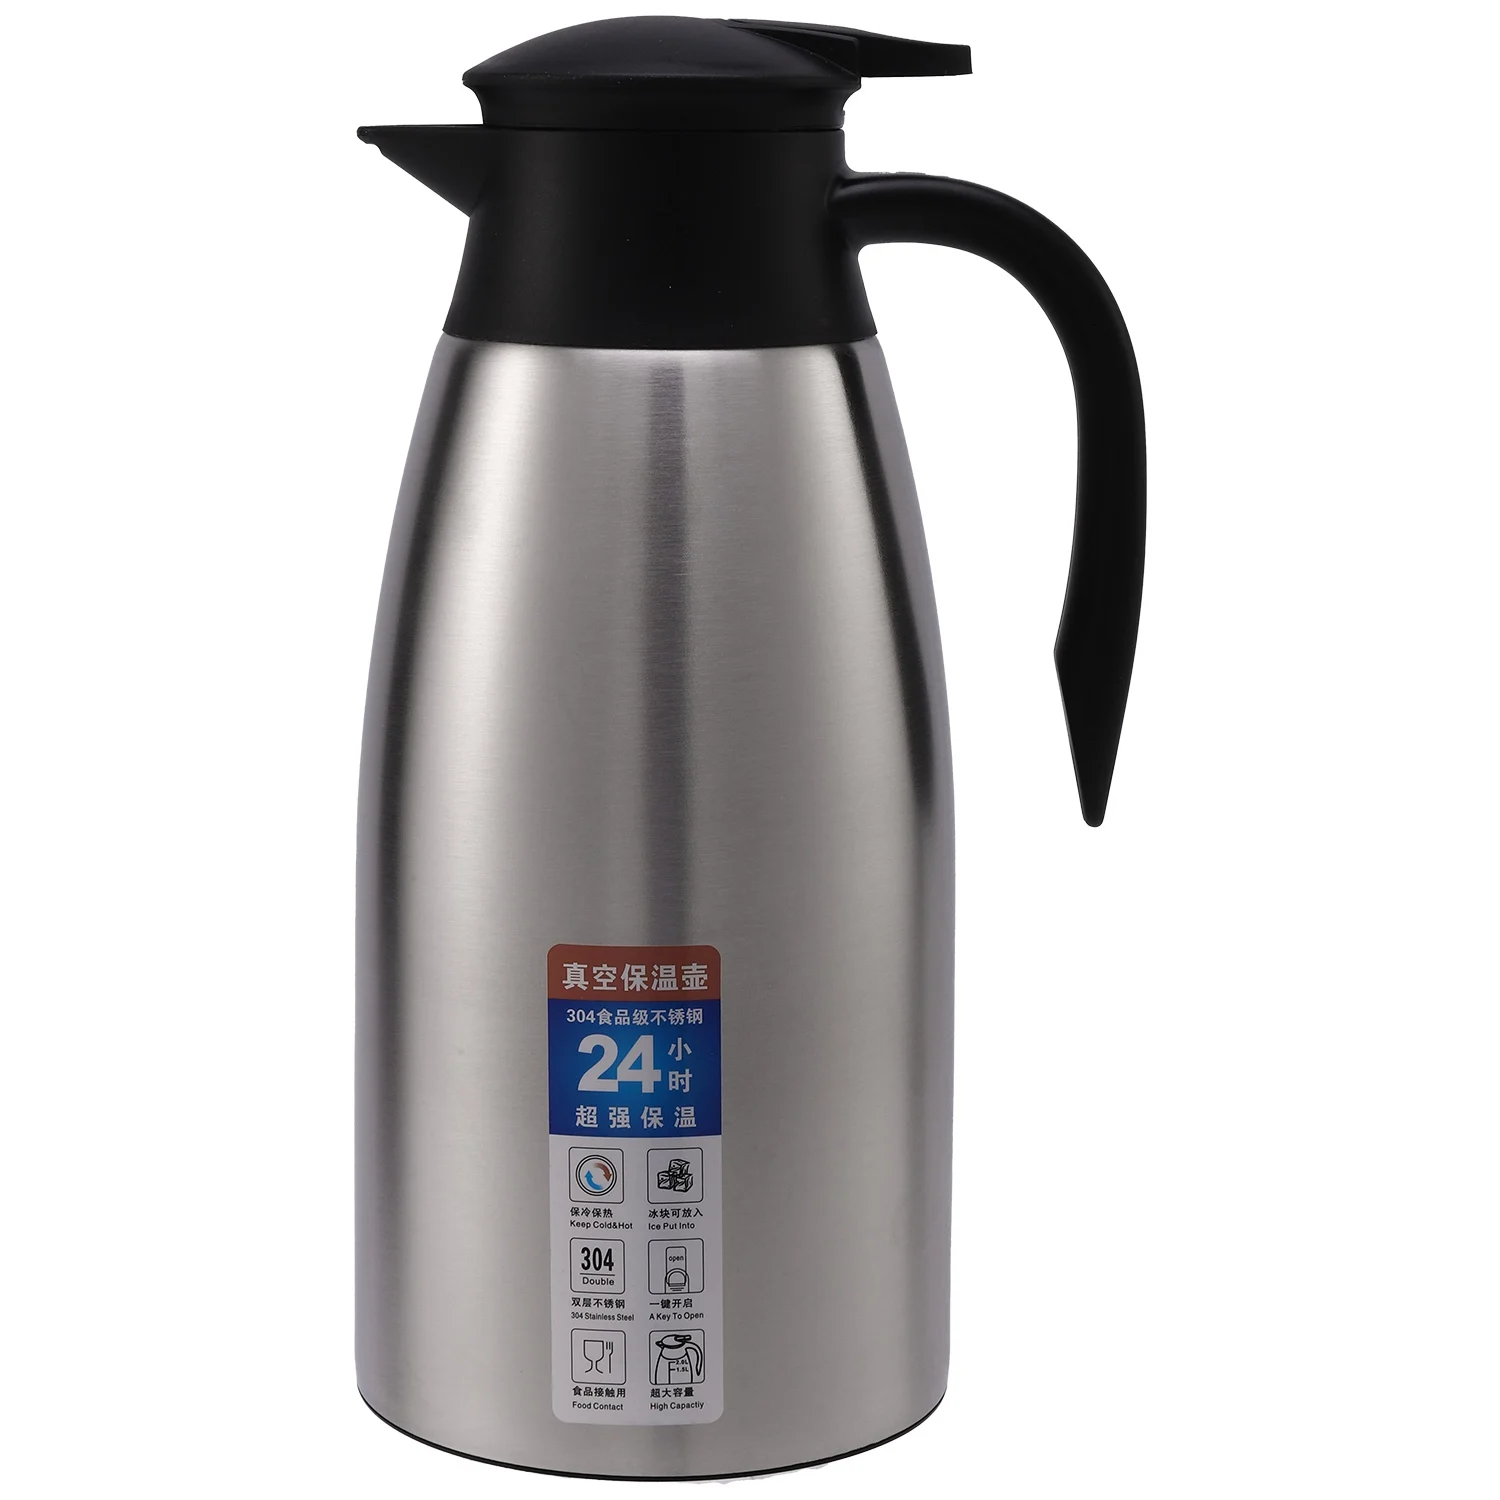 

Silver 304 Stainless Steel 2L Thermal Flask Vacuum Insulated Water Pot Coffee Tea Milk Jug Thermal Pitcher and Office